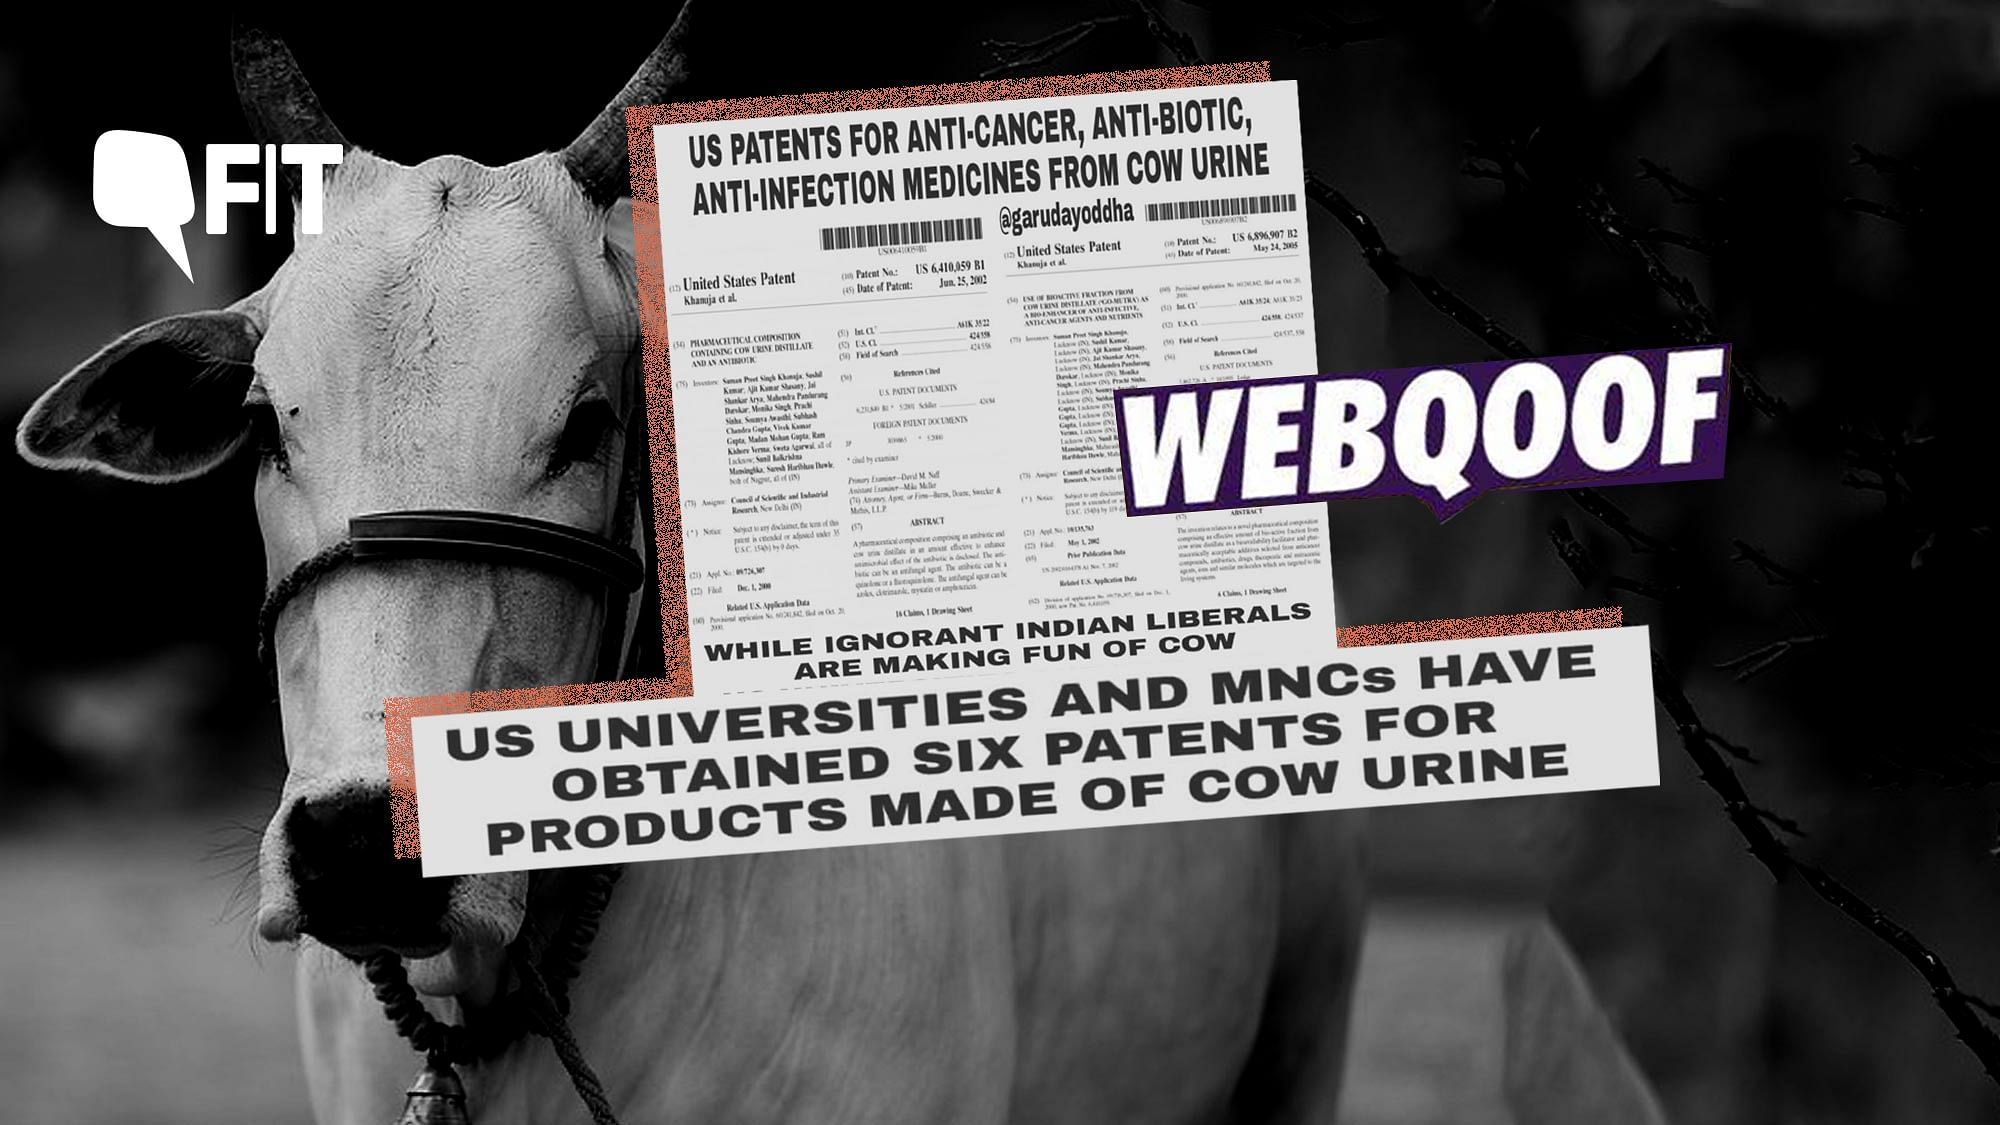 Have US Universities and MNC’s really obtained six patents for medicines made of cow urine?&nbsp;